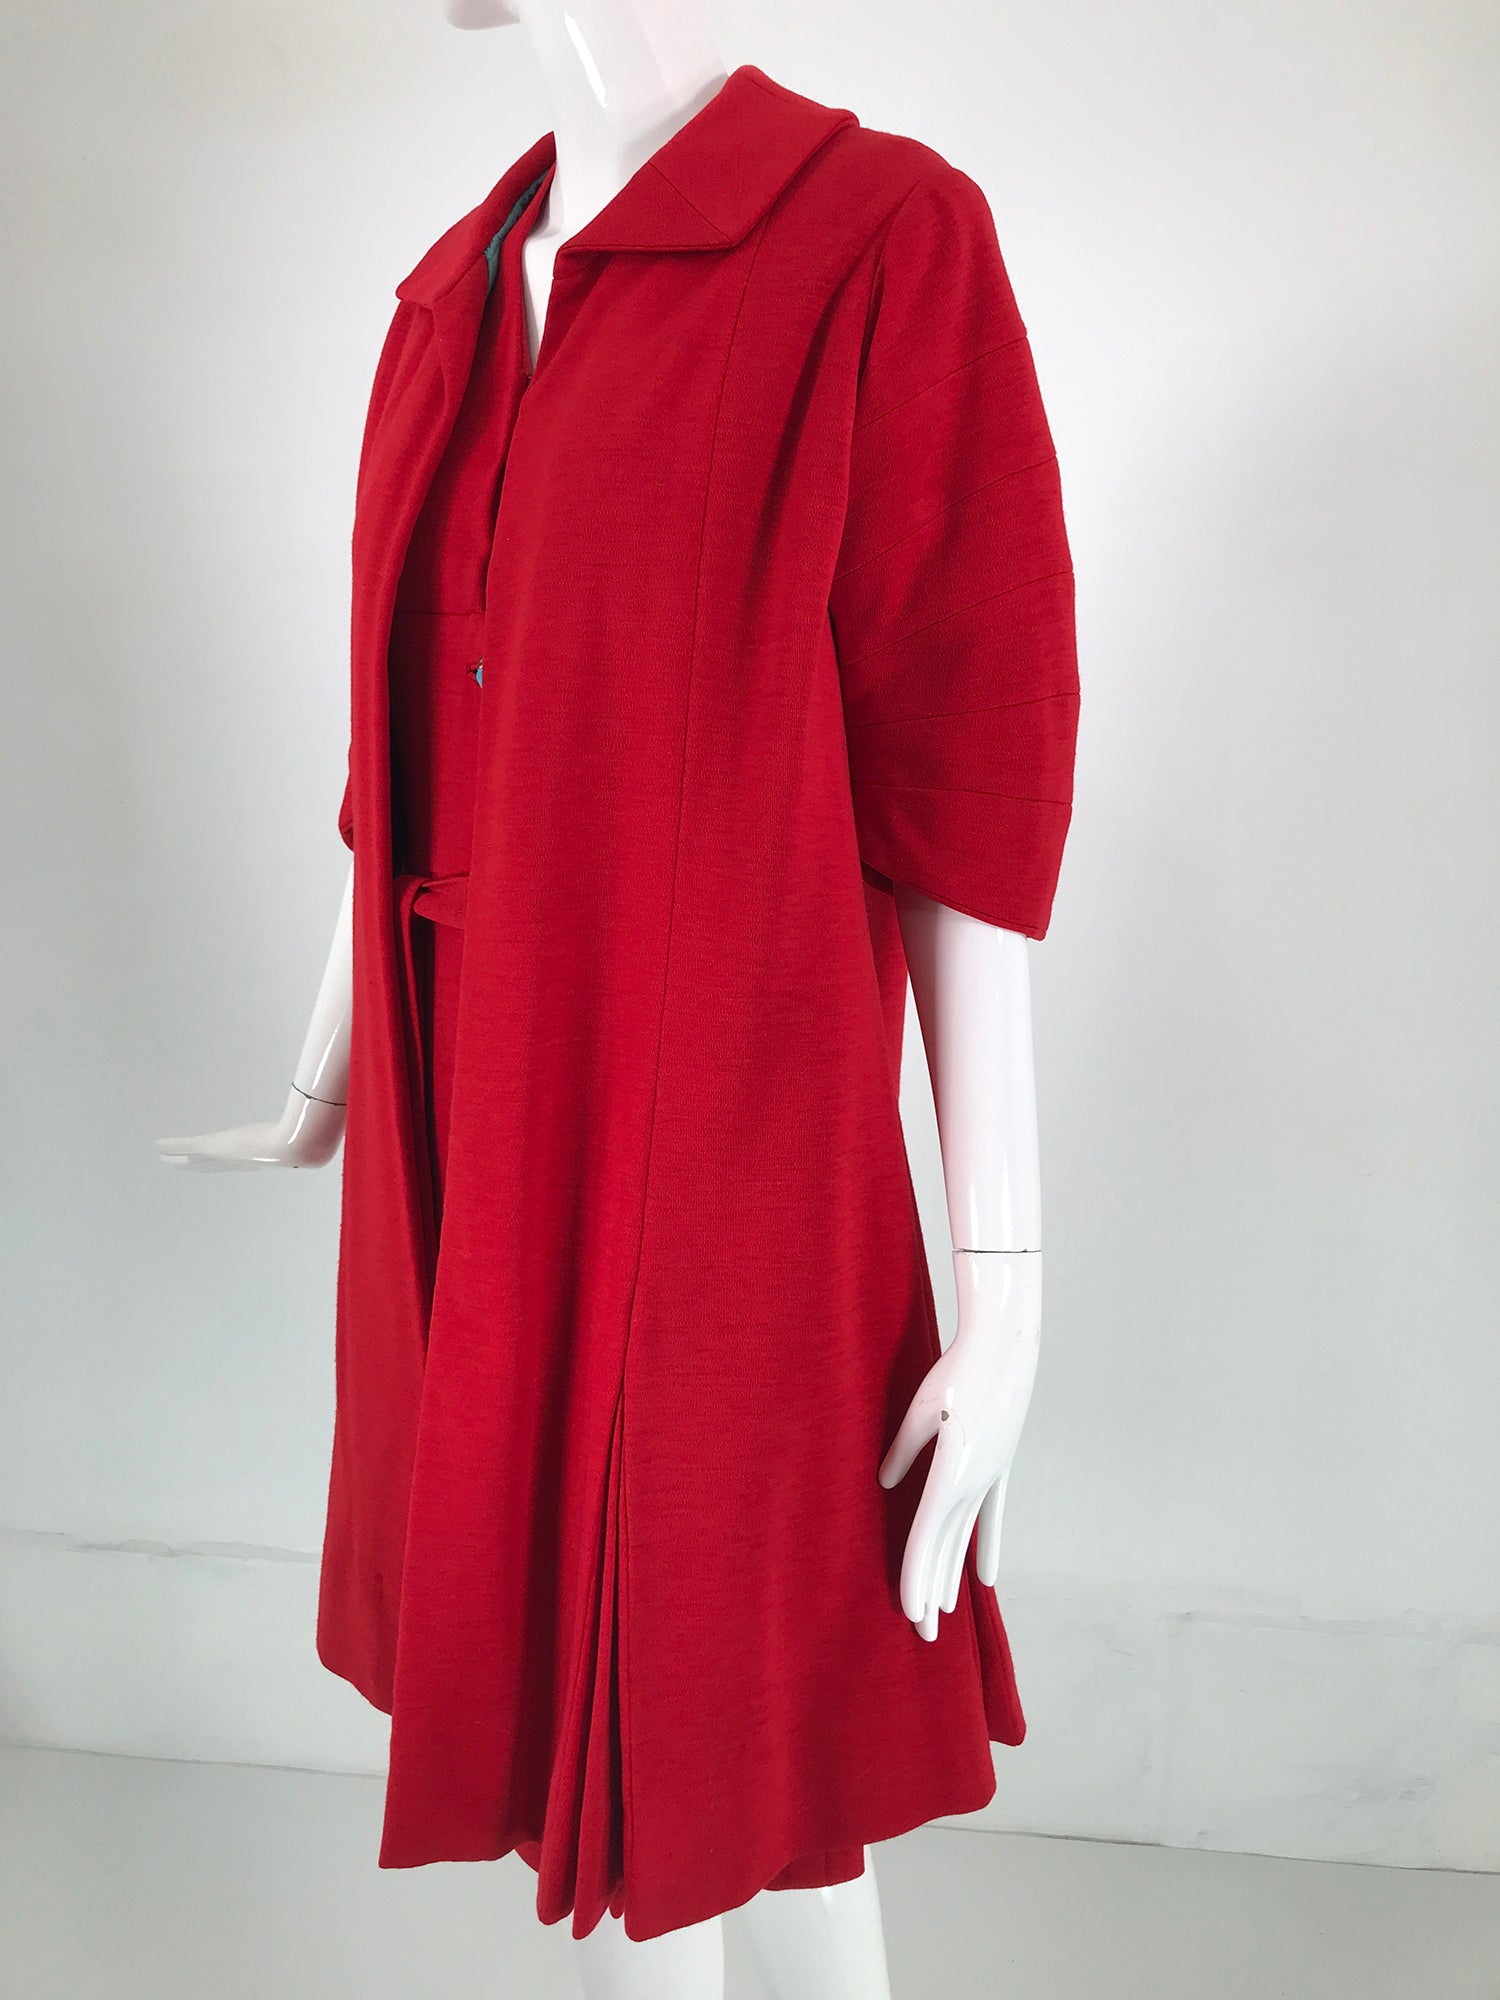 Coco Chanel Red Haute Couture 1950s 2 pc Wool Jersey Jewel Button